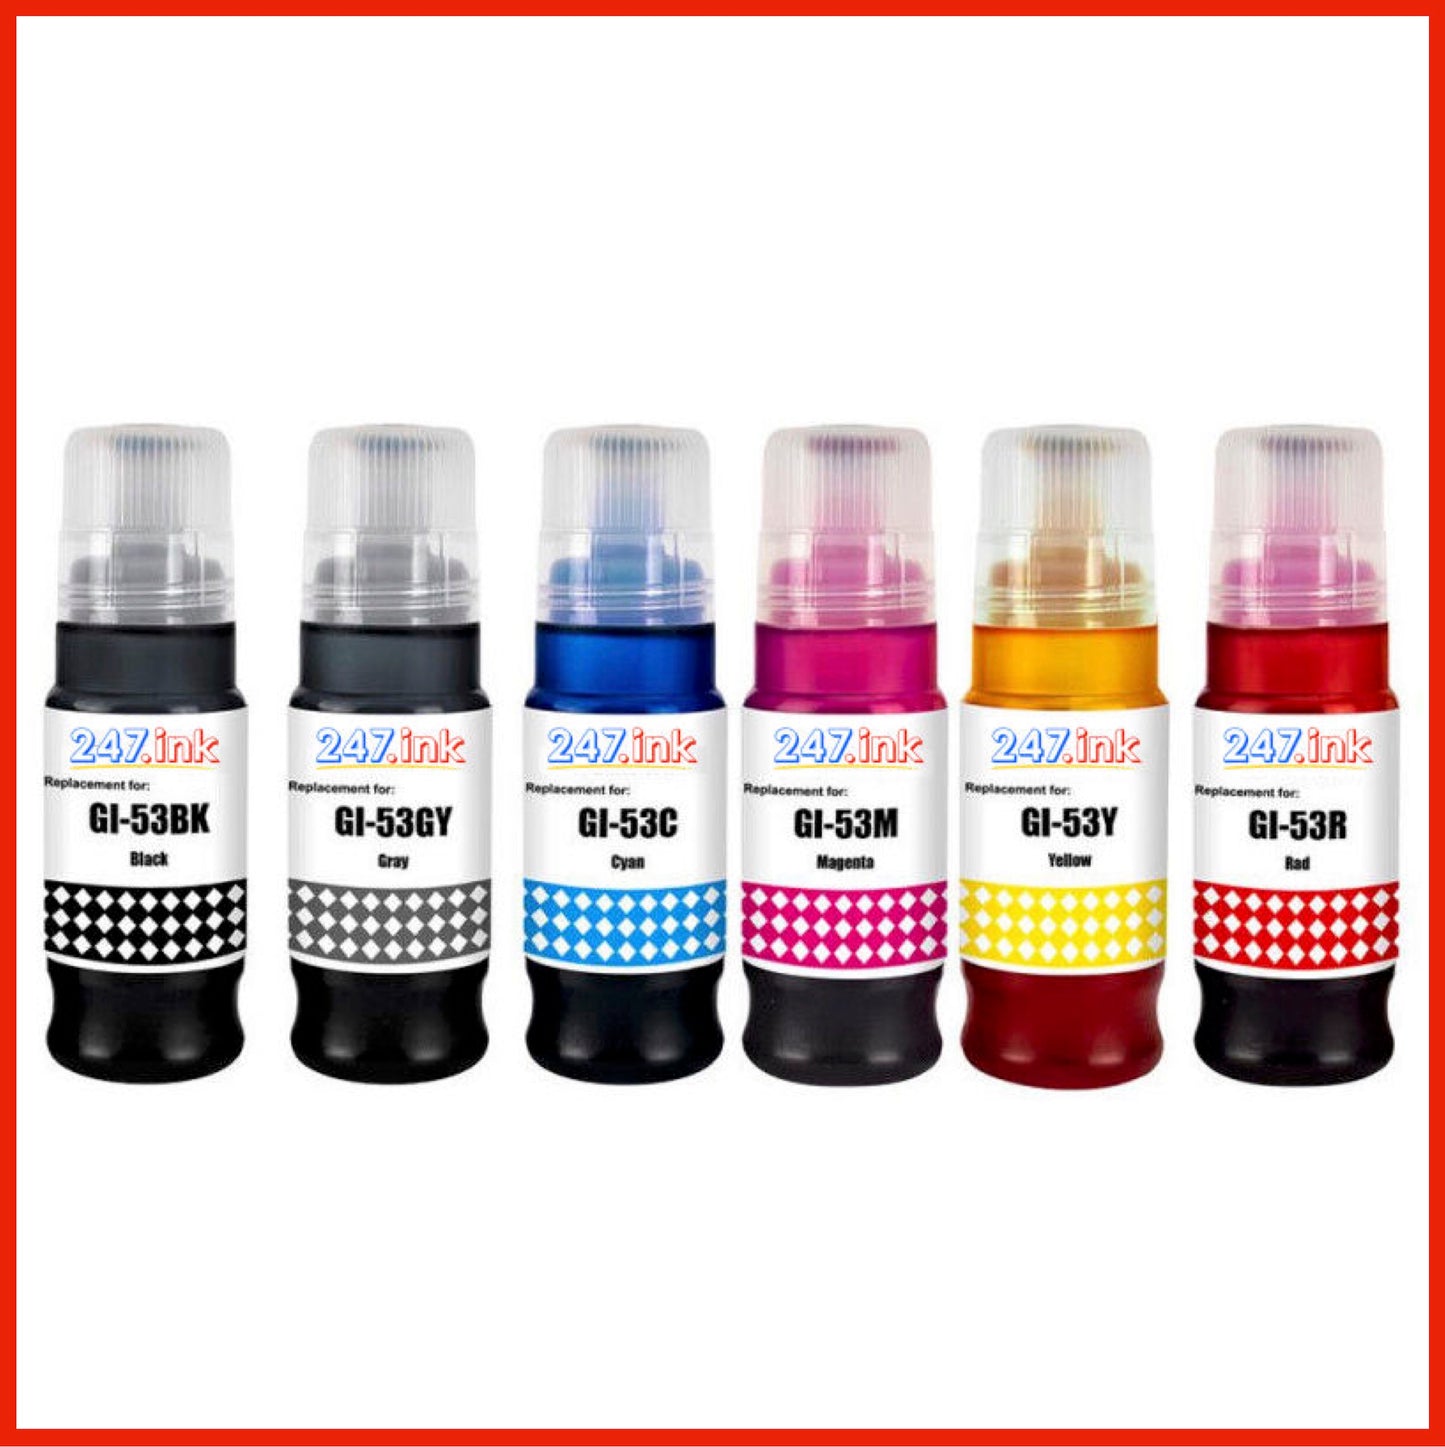 Compatible Multipack of Ink Bottles for GI-53 Canon Pixma (70ml) B/C/M/Y/R/G